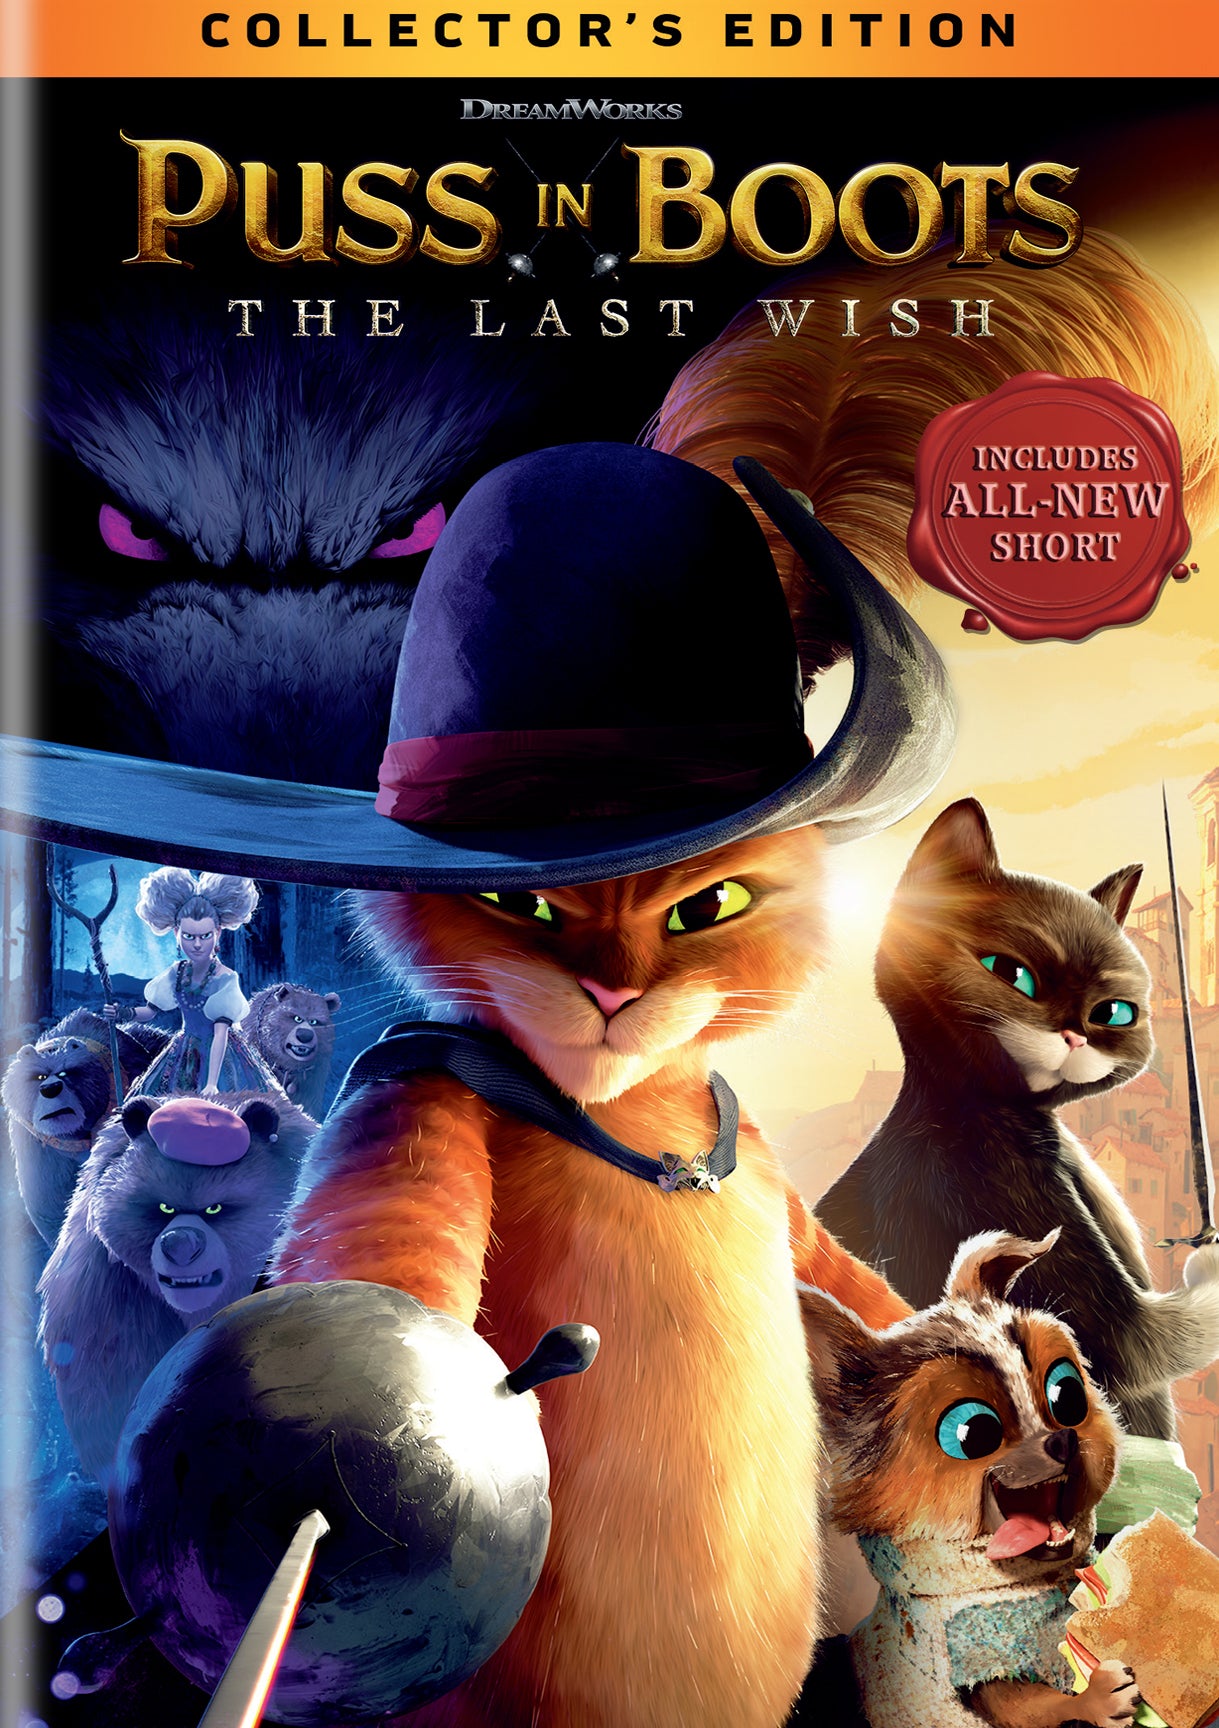 Puss in Boots: The Last Wish cover art